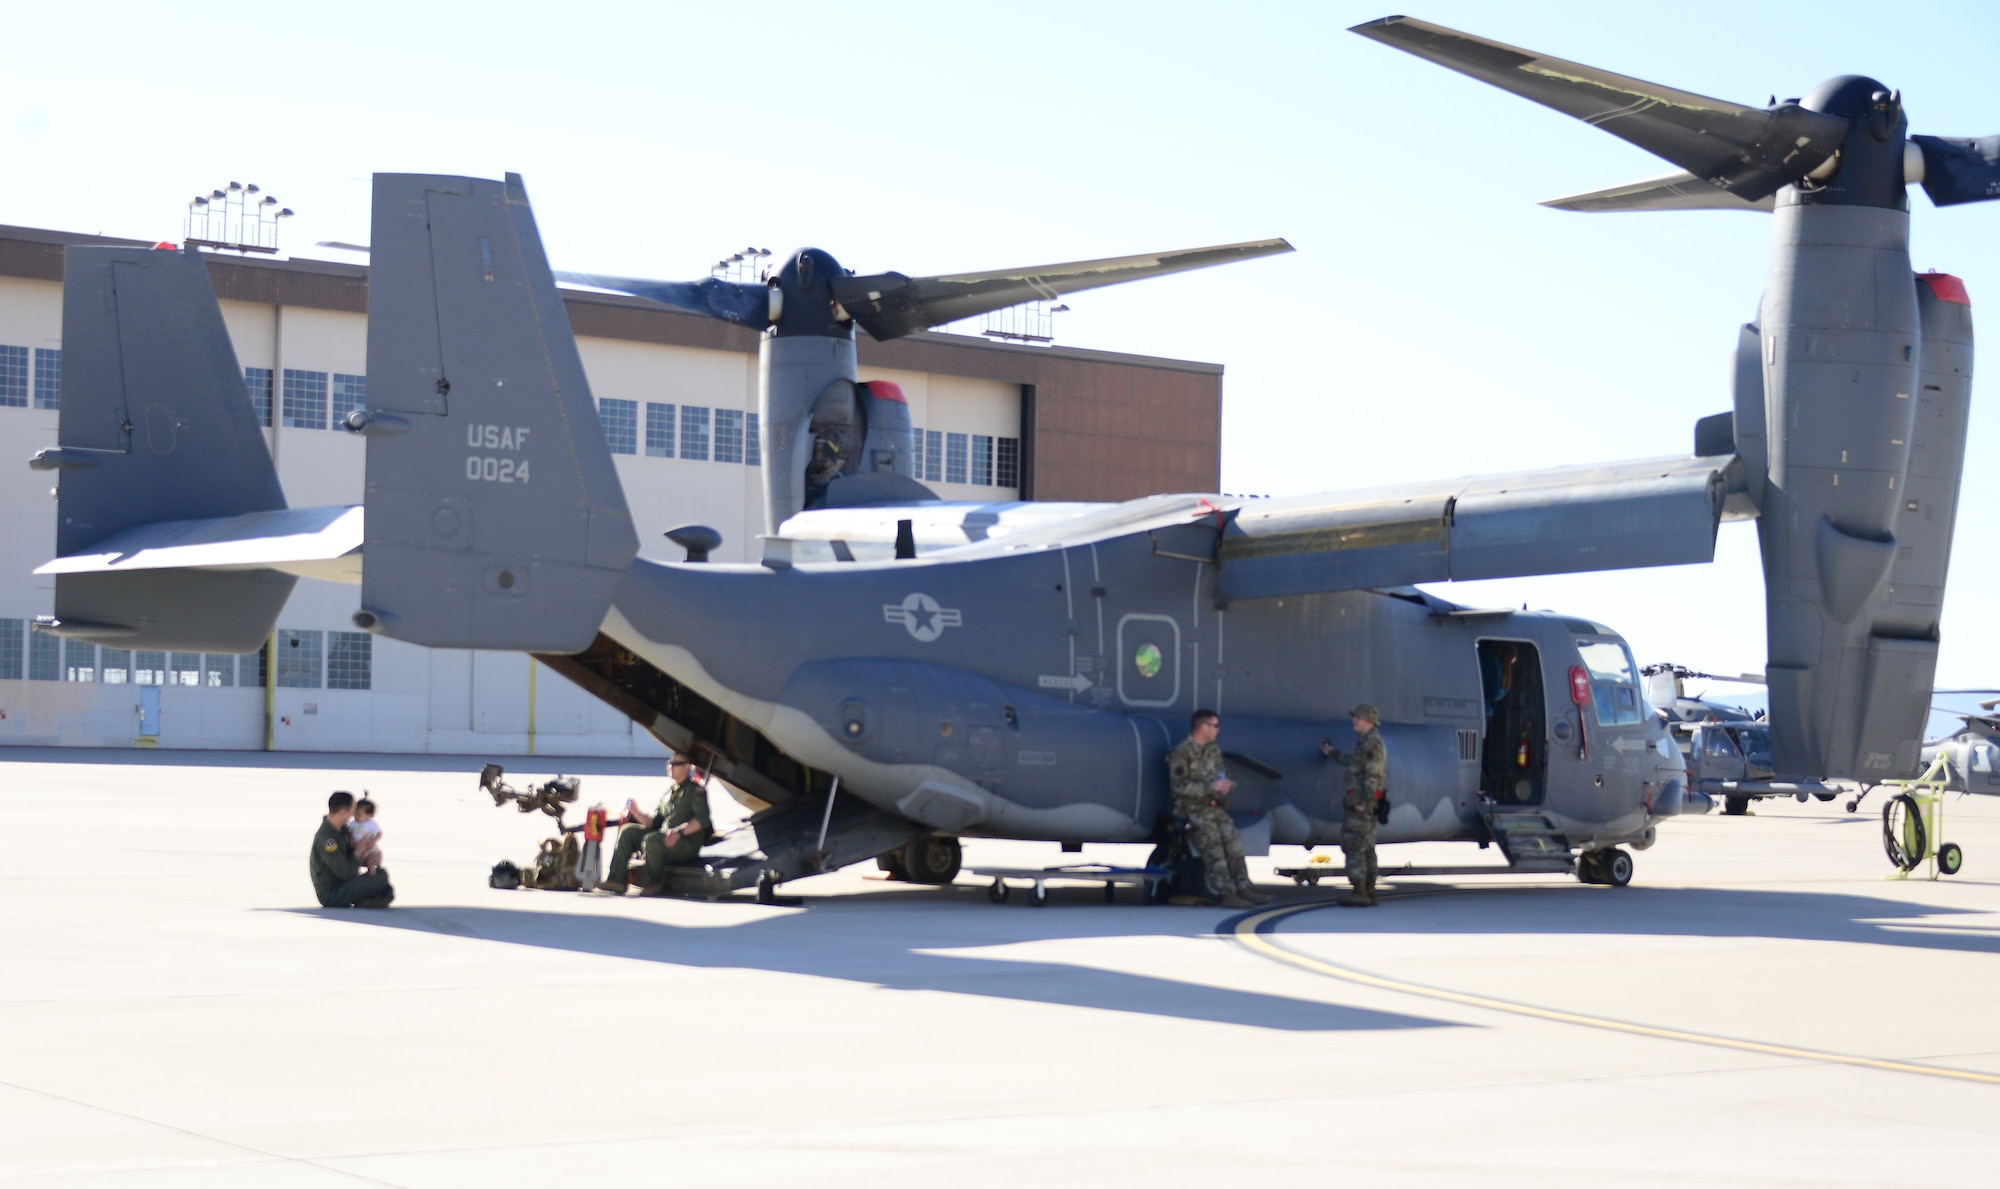 Members of the 150th and 58th Special Operations Wings show their families around the wing and the aircraft during the Wing’s annual Spouses Day event at Kirtland Air Force Base, New Mexico. May 14, 2022. (U.S. Air Force photo by Jeremy T. Dyer.)